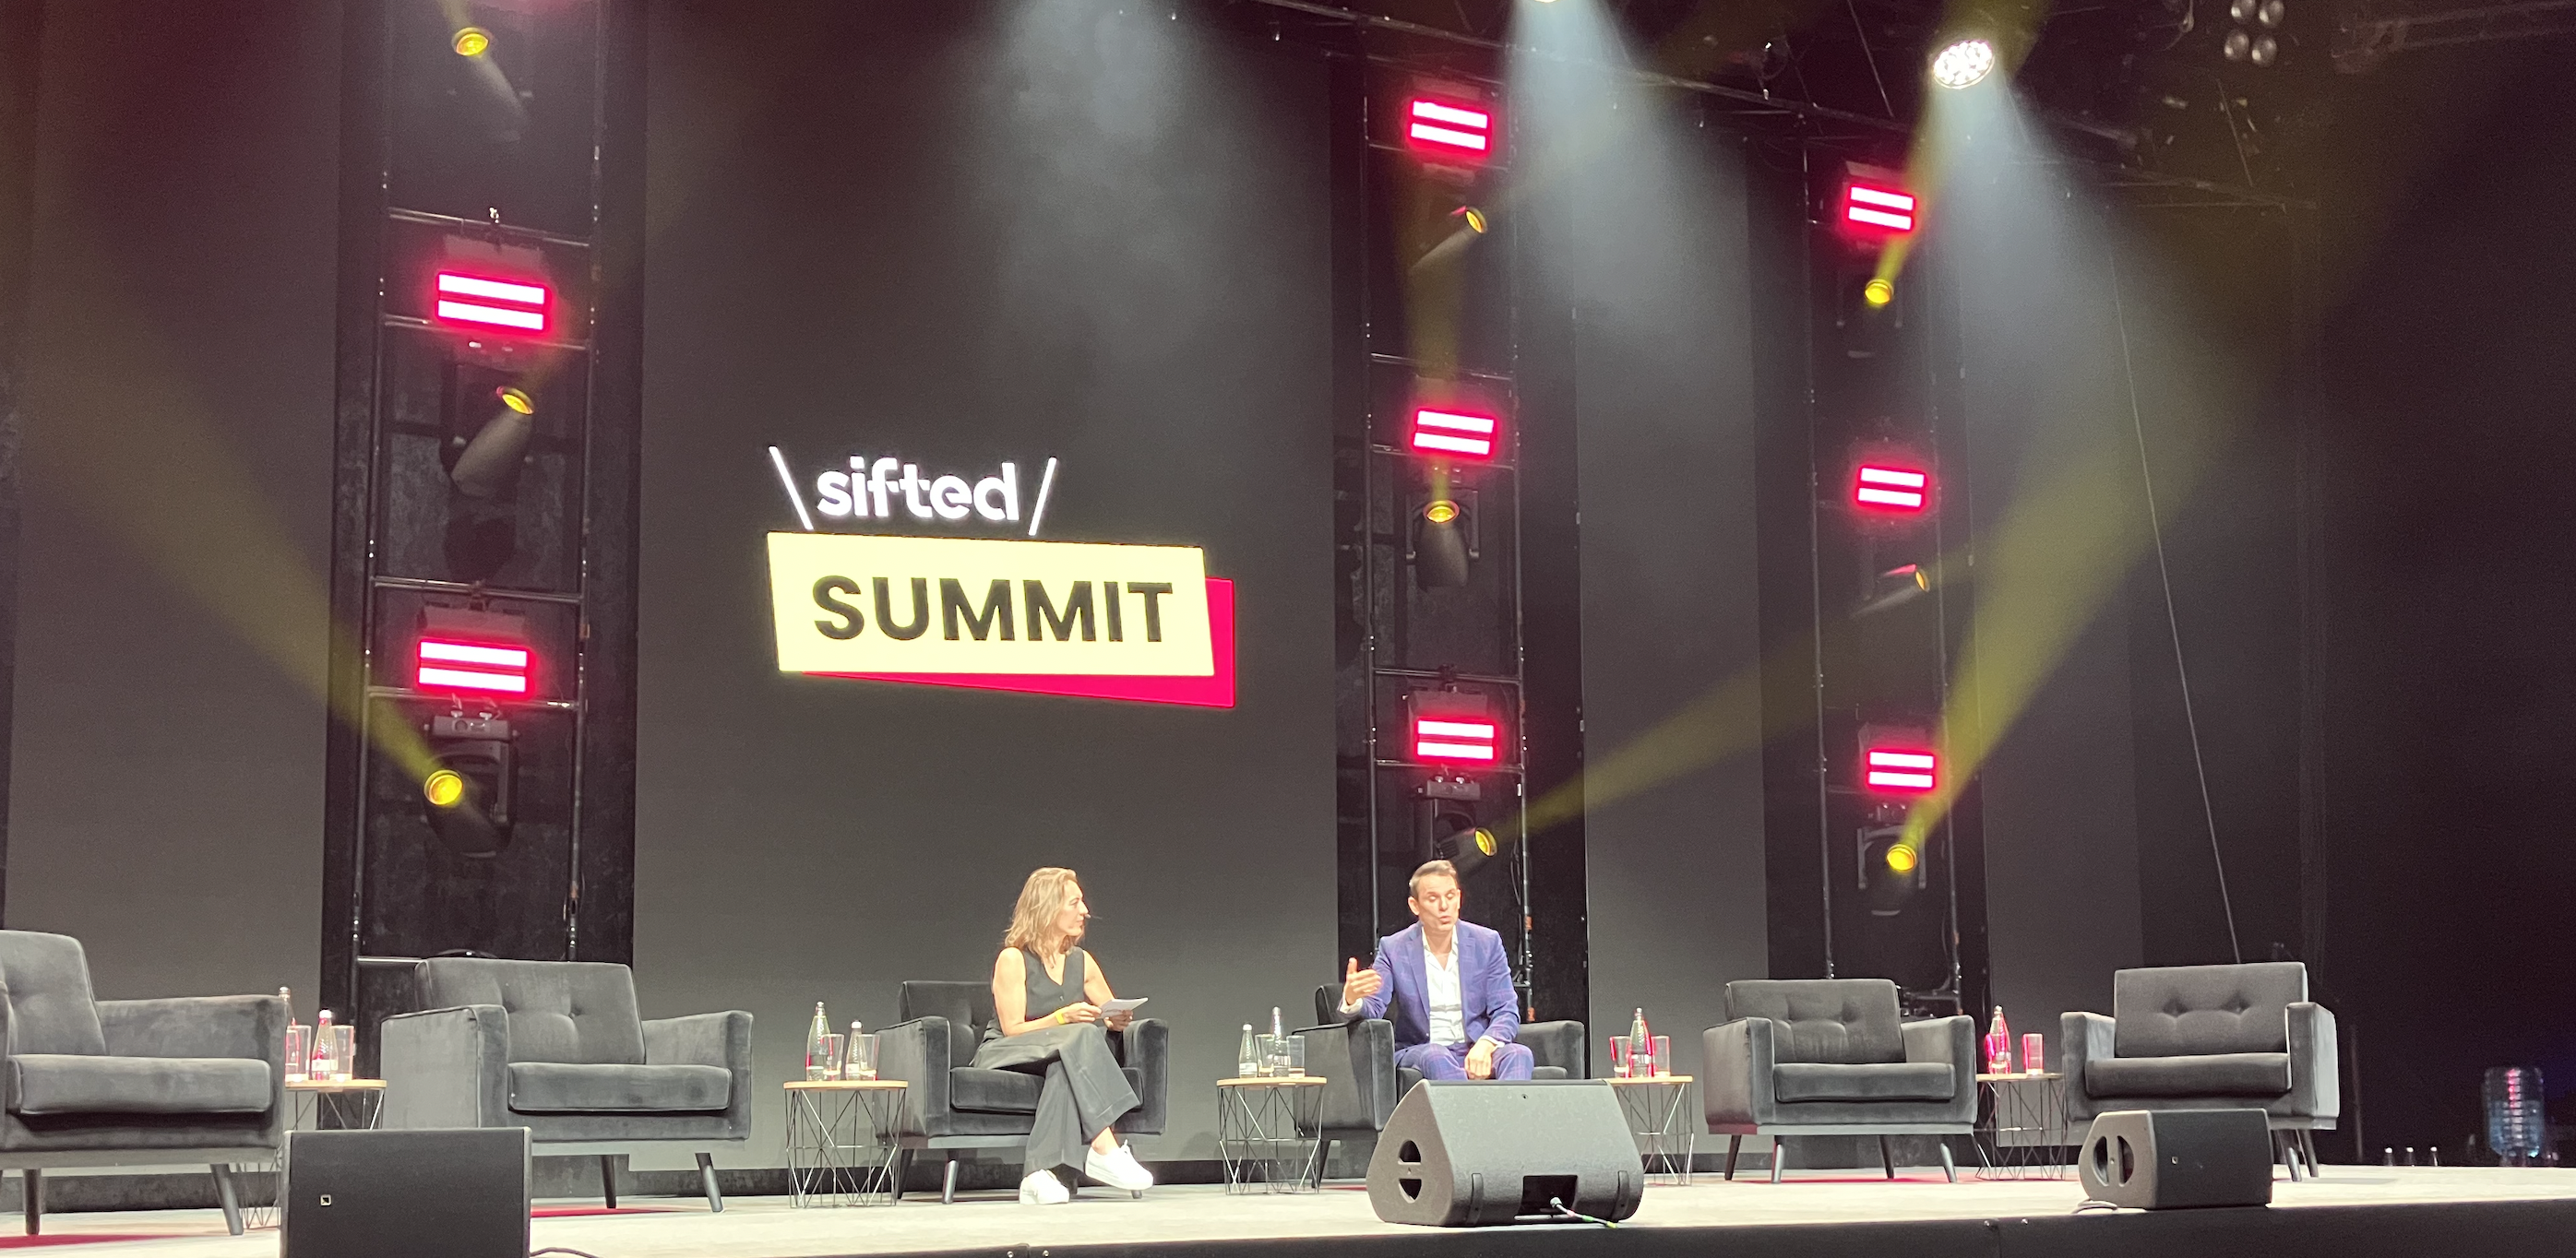 Christian Angermayer on stage with Sifted's Mimi Billing at Sifted Summit